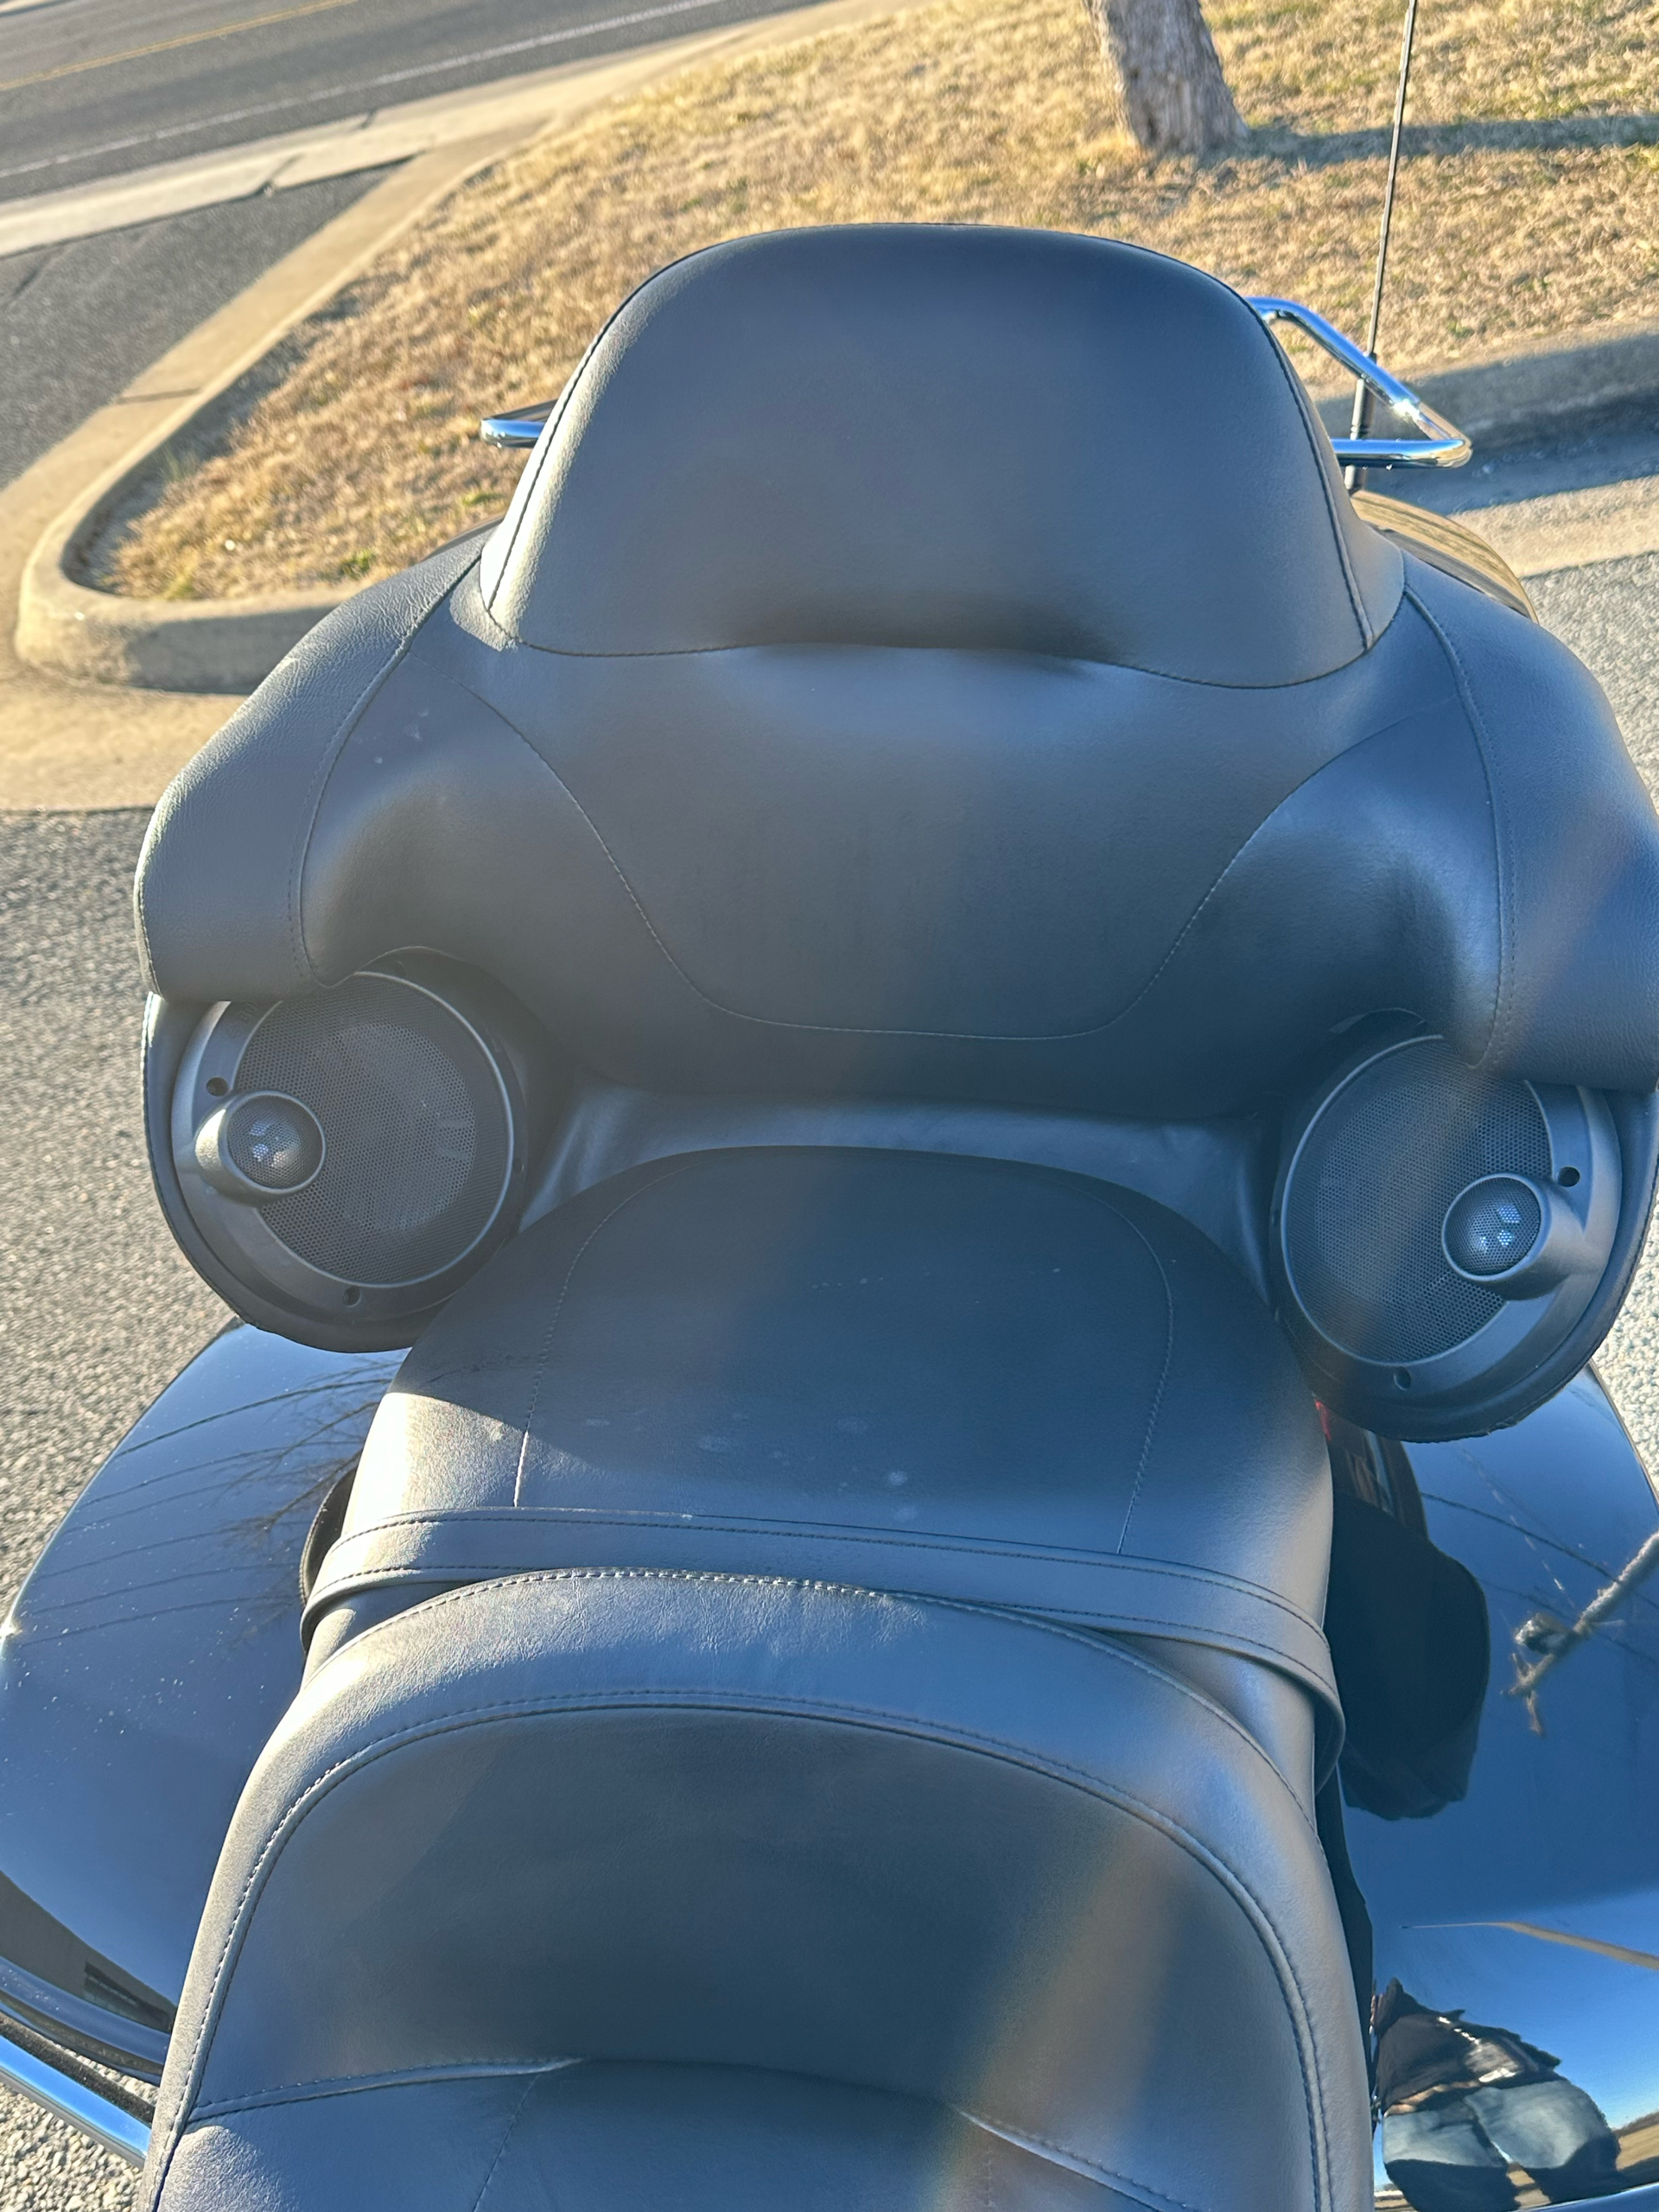 2017 Harley-Davidson Ultra Limited in Dumfries, Virginia - Photo 10